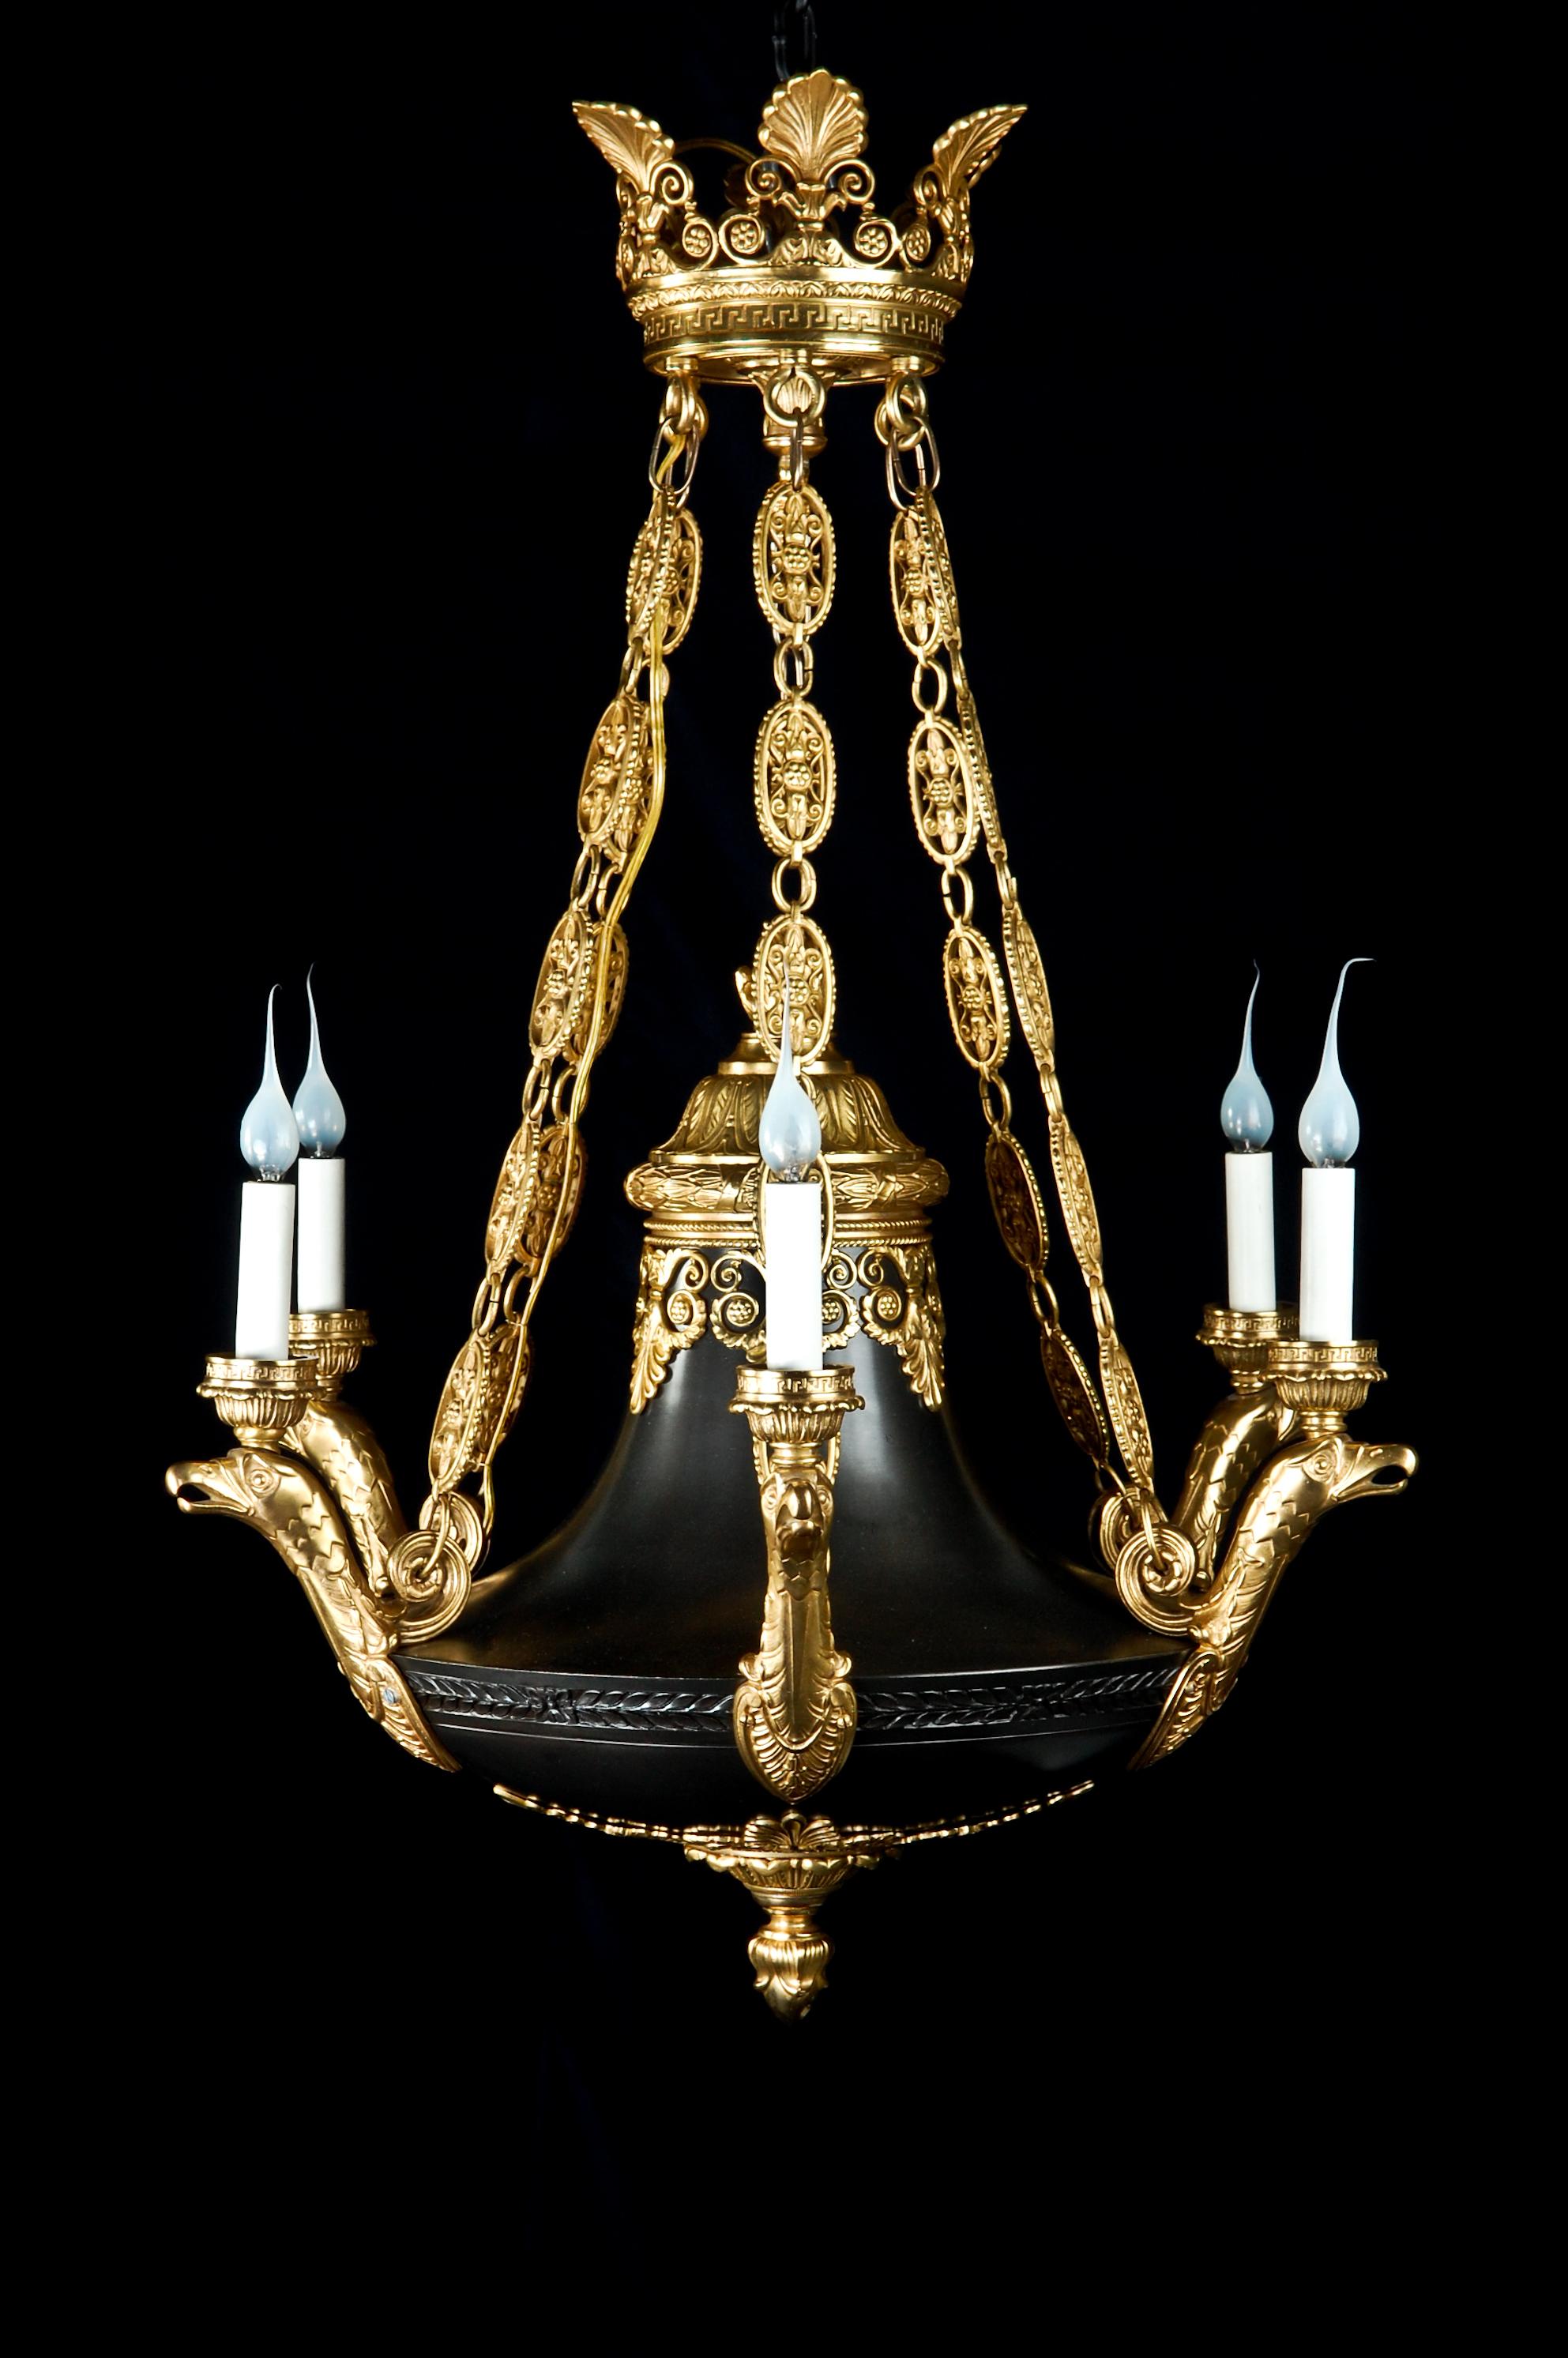 A superb and unique antique French Empire style neoclassical gilt and patinated bronze multi light chandelier of fine detail. This fine chandelier is embellished with reticulated gilt bronze chains, neoclassical gilt bronze ornaments and further